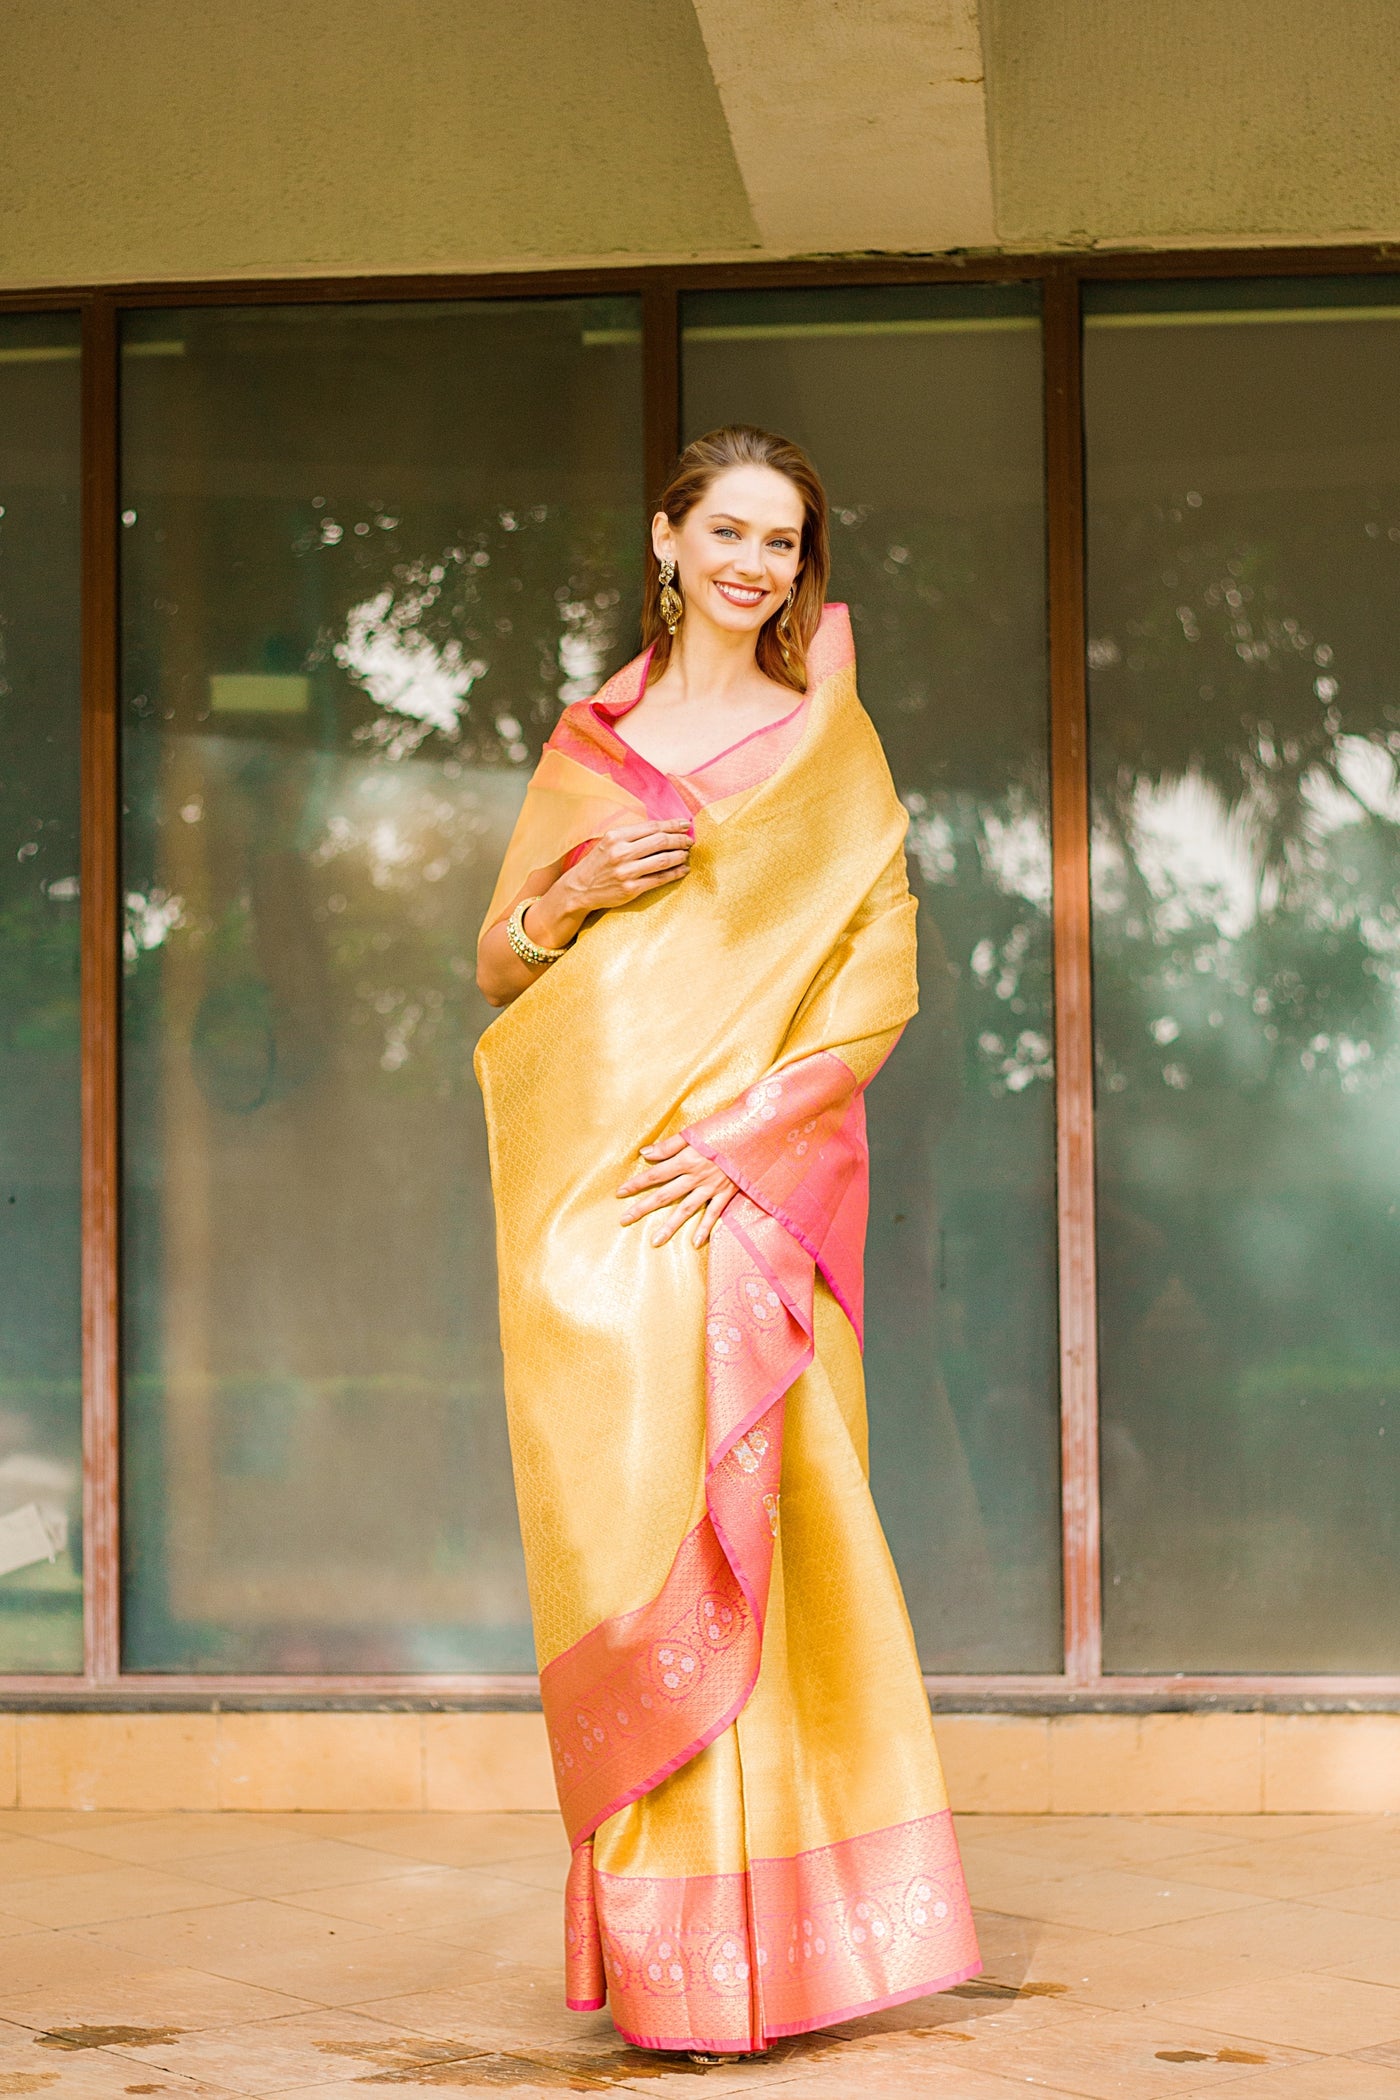 Canary Yellow Banarasi Saree Indian Clothing in Denver, CO, Aurora, CO, Boulder, CO, Fort Collins, CO, Colorado Springs, CO, Parker, CO, Highlands Ranch, CO, Cherry Creek, CO, Centennial, CO, and Longmont, CO. NATIONWIDE SHIPPING USA- India Fashion X